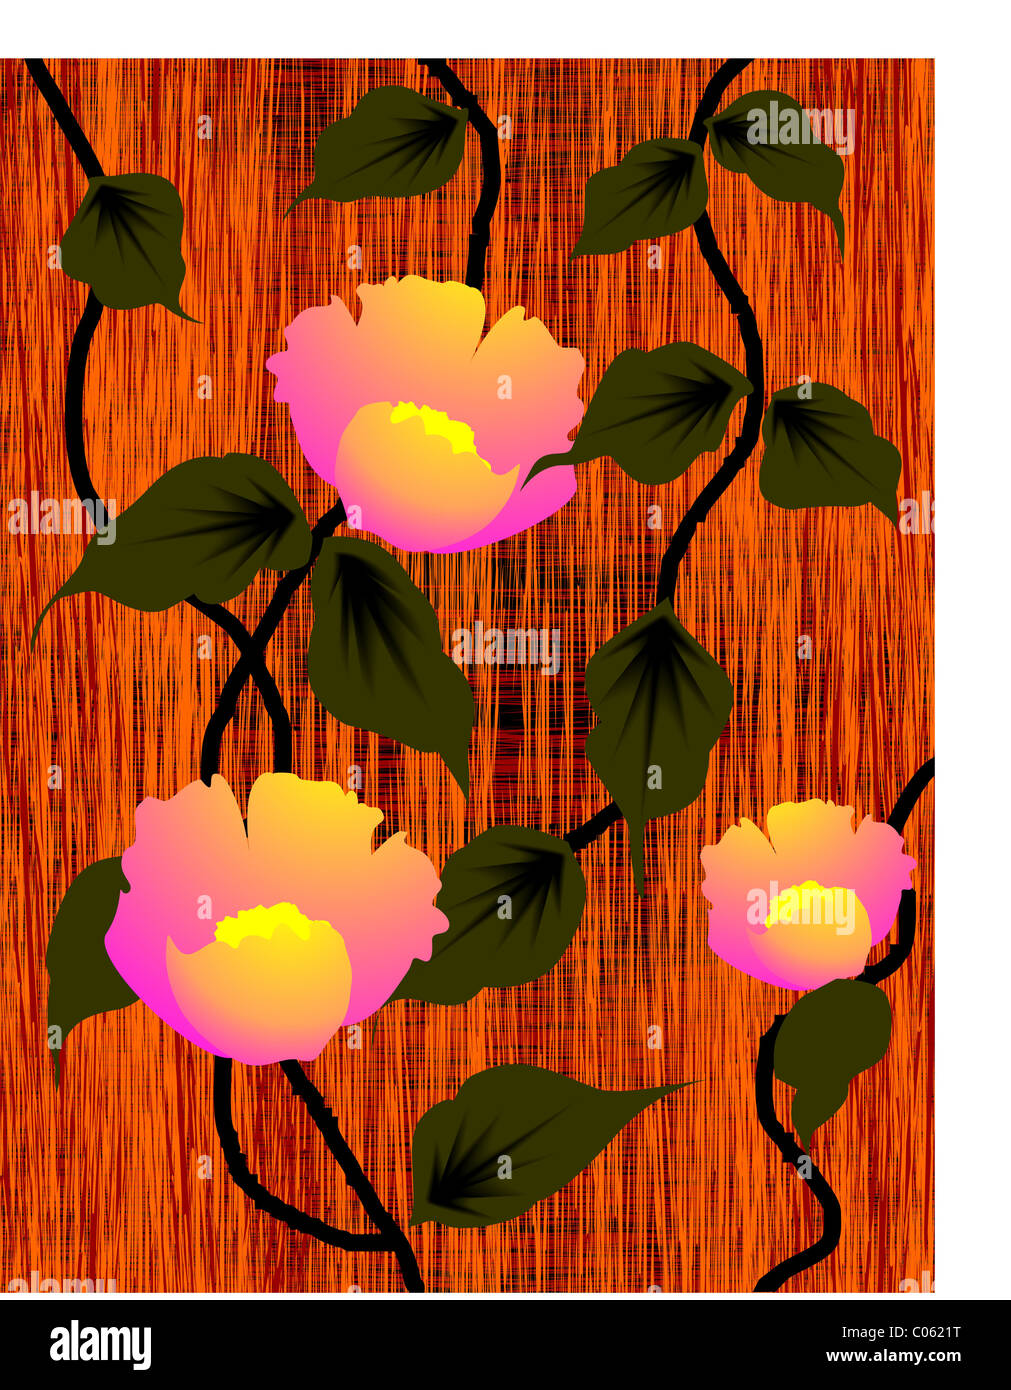 Digital painting of flowers and leaves. The artist is feeling the beauty of the bunch of flowers and the leaves. Stock Photo